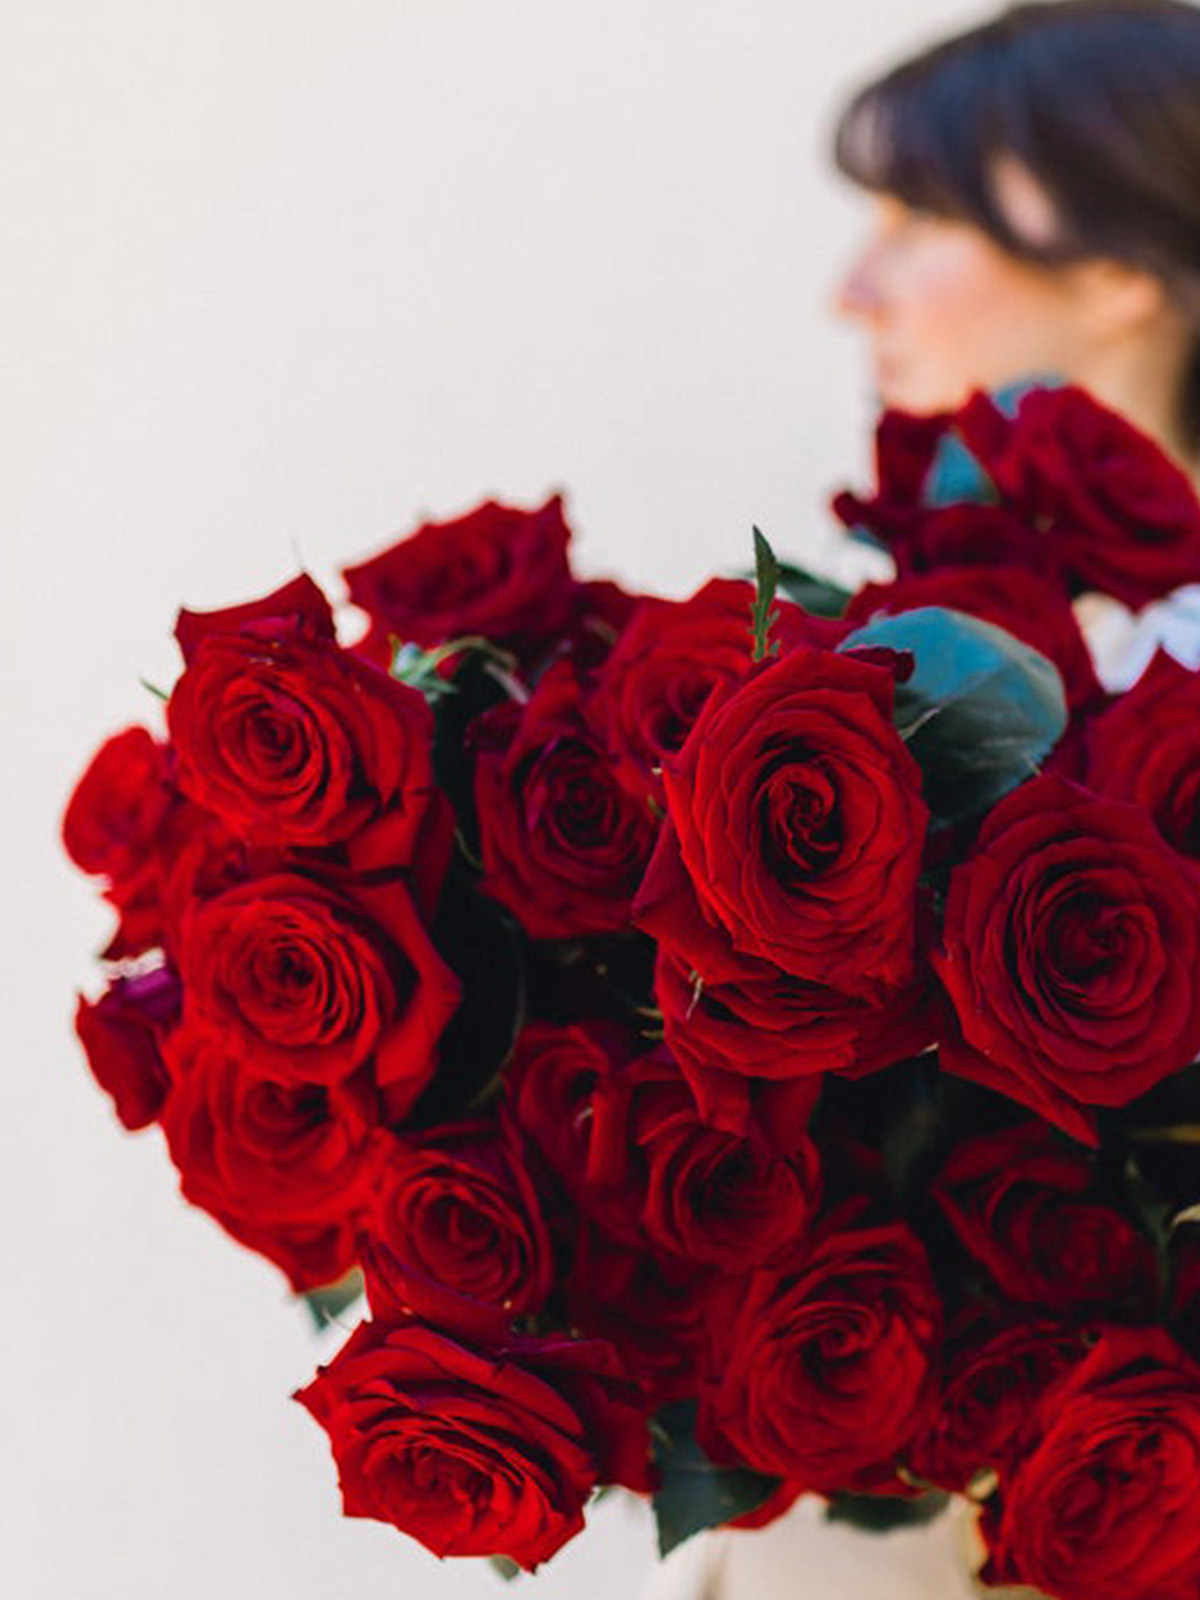 Why We Give Roses on Valentine's Day